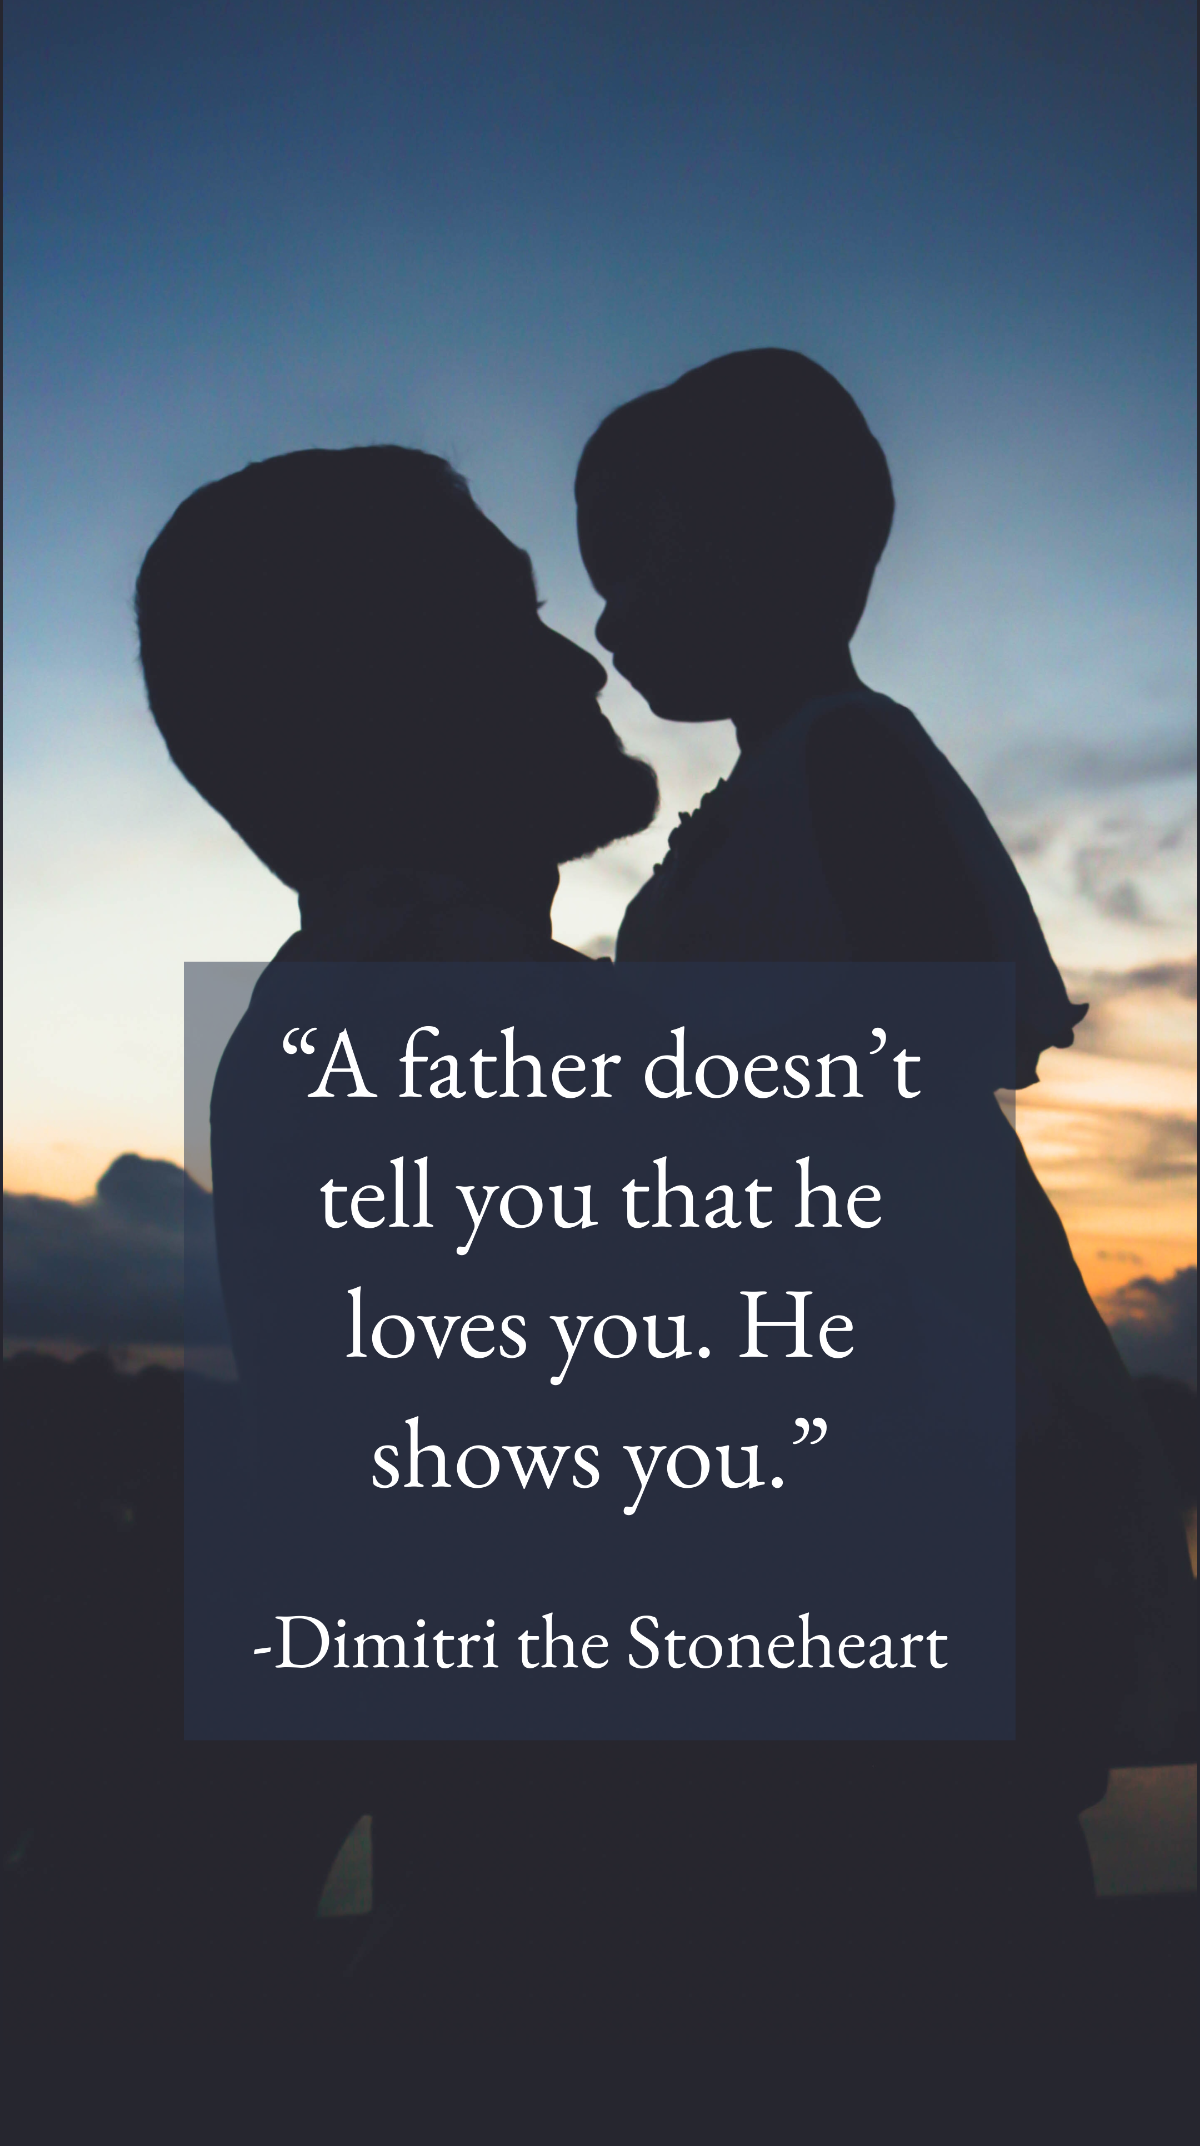 Dimitri the Stoneheart - “A father doesn’t tell you that he loves you. He shows you.” Template